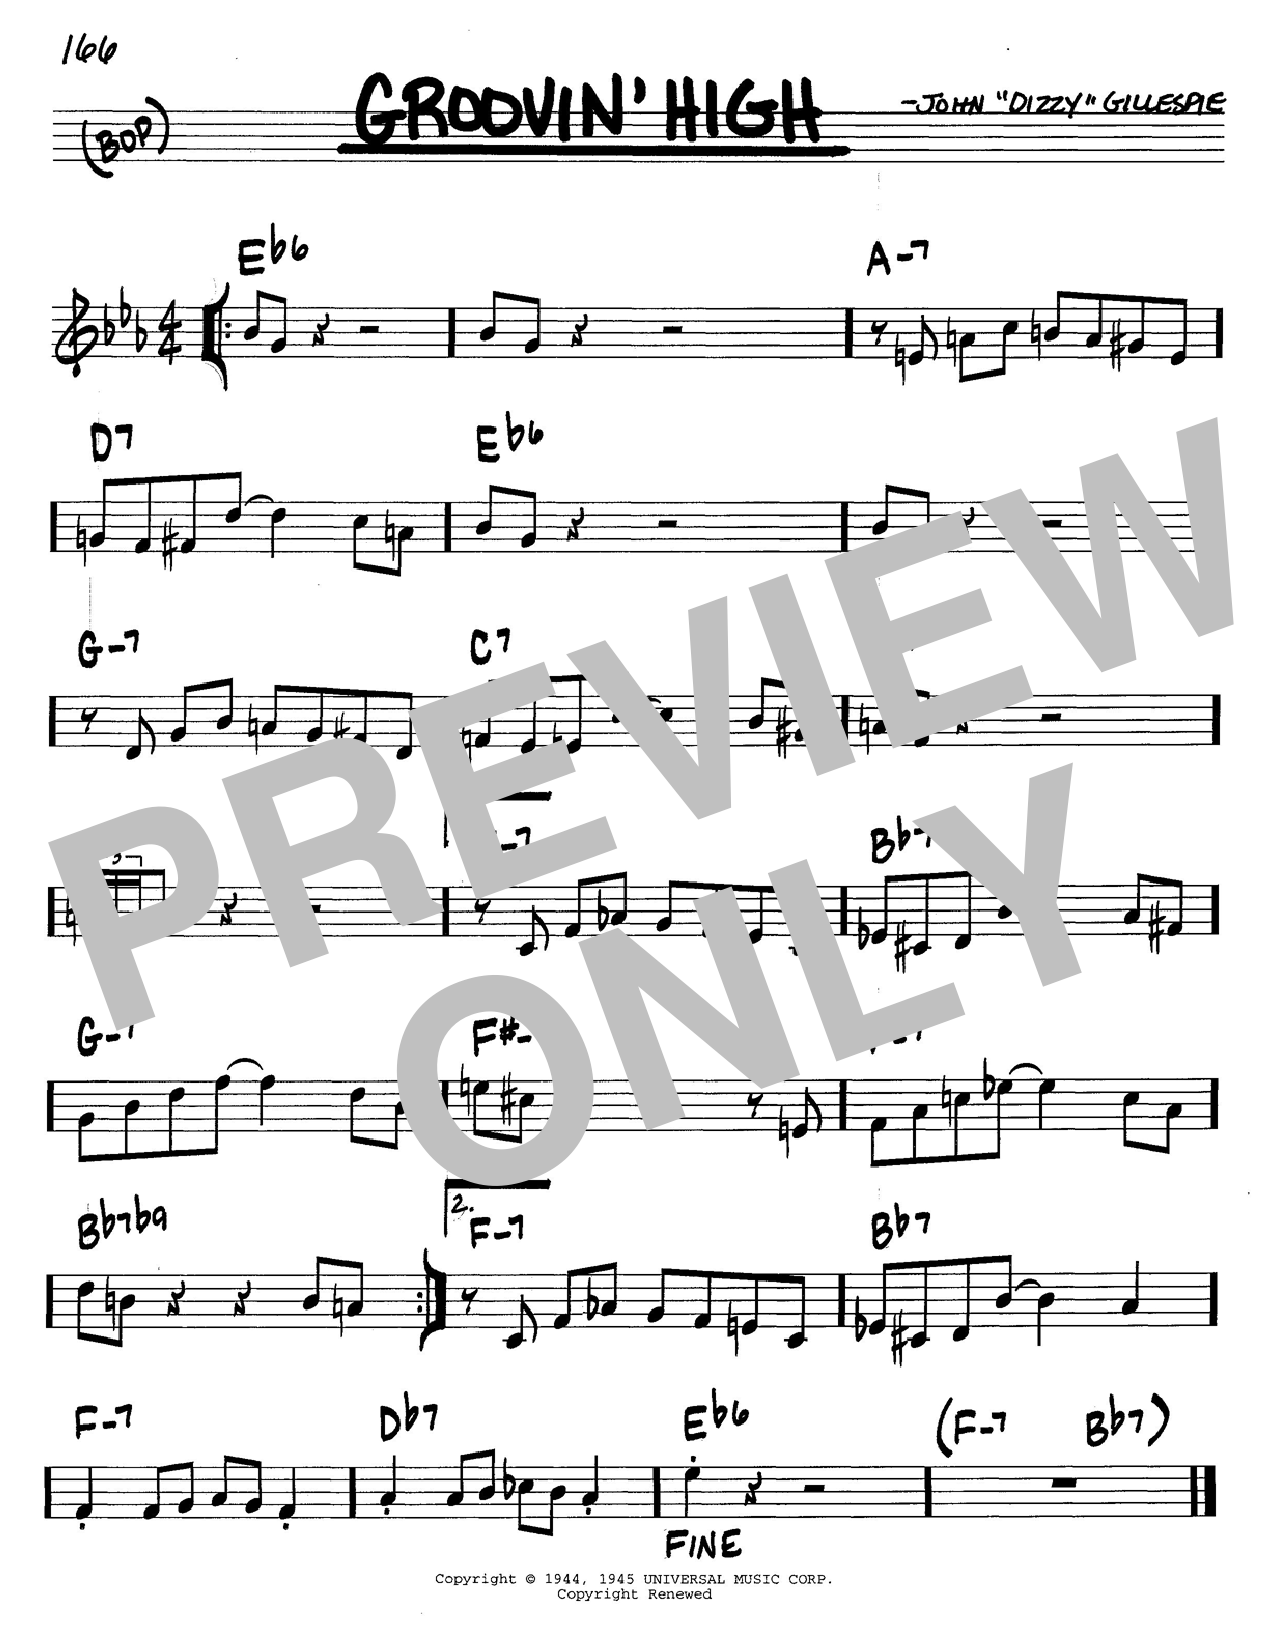 Dizzy Gillespie Groovin' High sheet music notes and chords. Download Printable PDF.